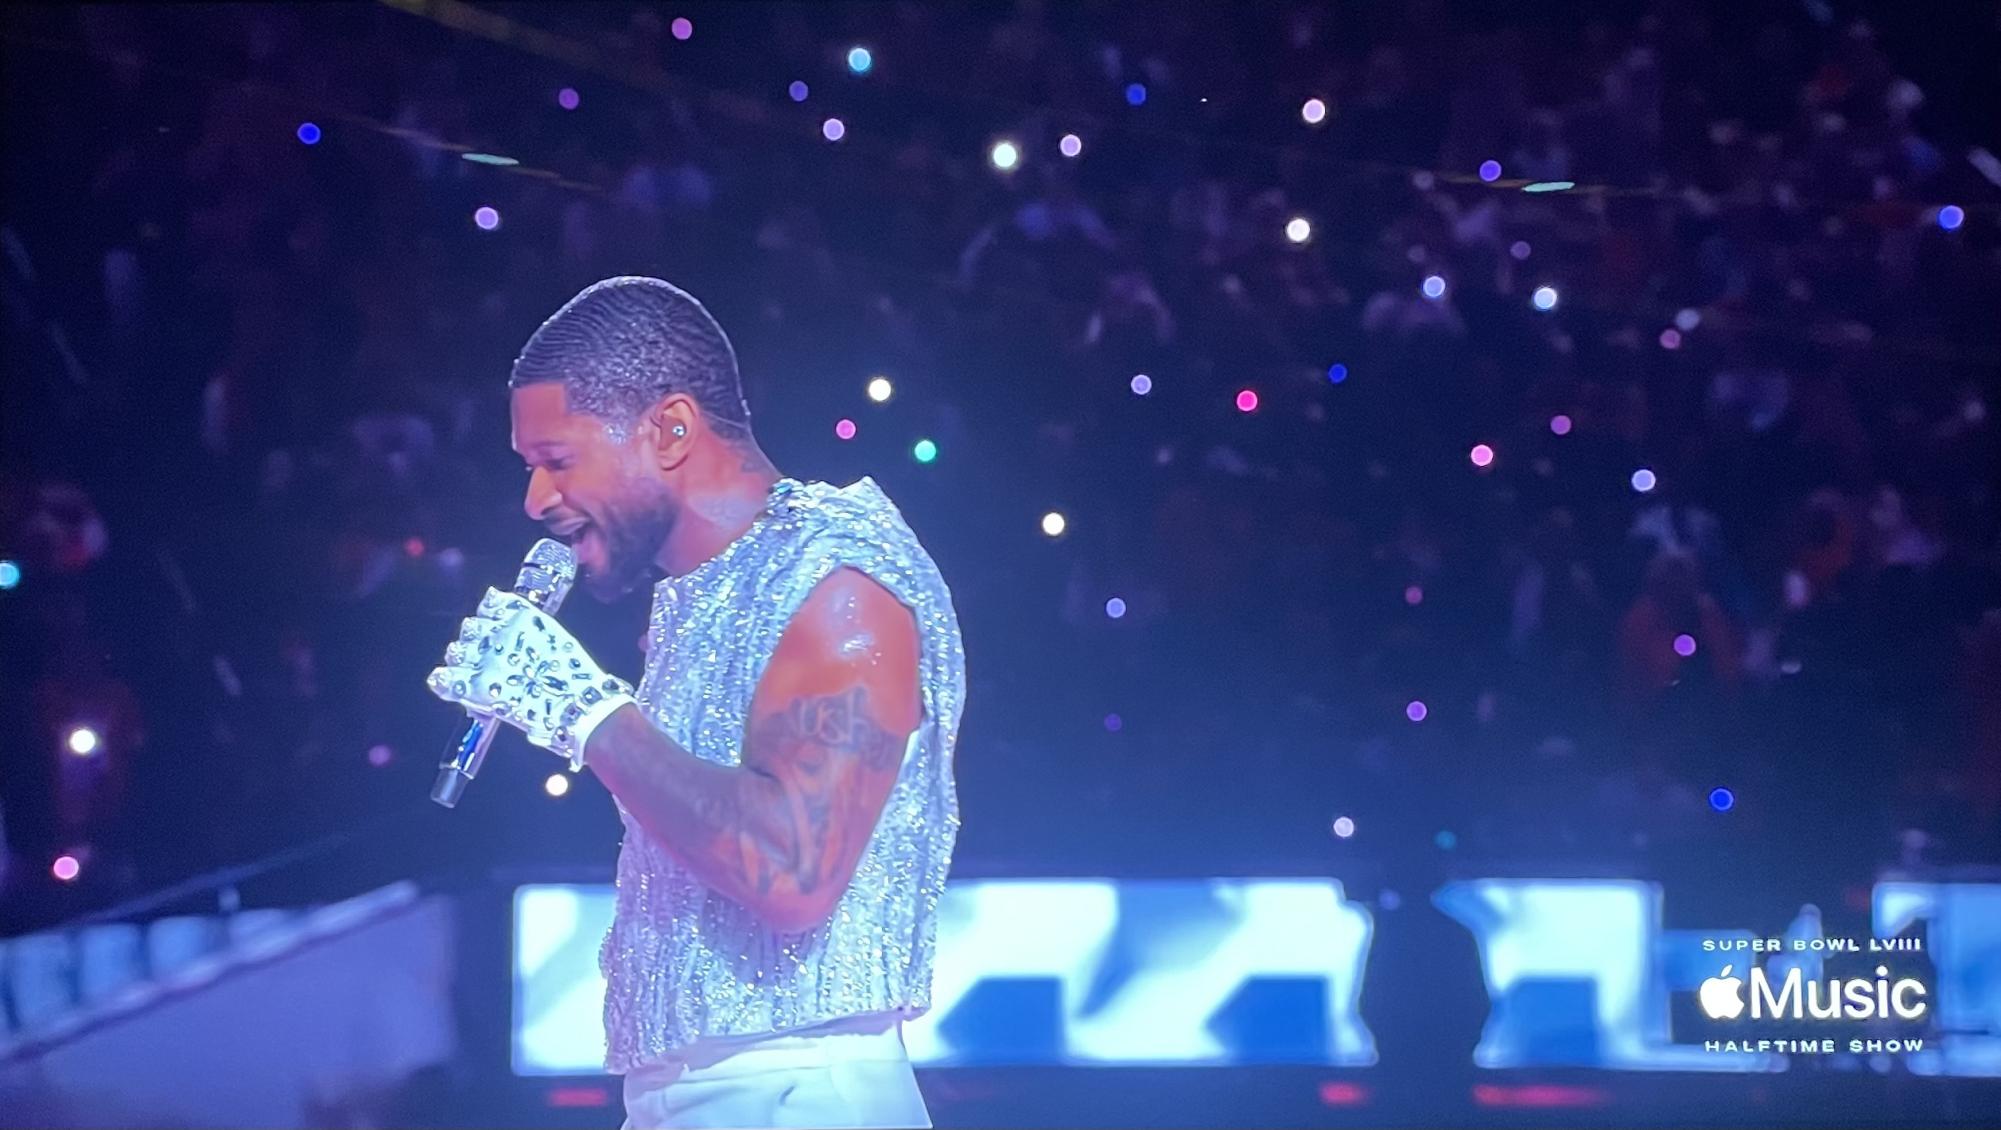 Ushers performance in the halftime show was very impressive. He was putting in so much work into the performance and making the experience amazing for all the fans and it showed by the sweat on his face. 